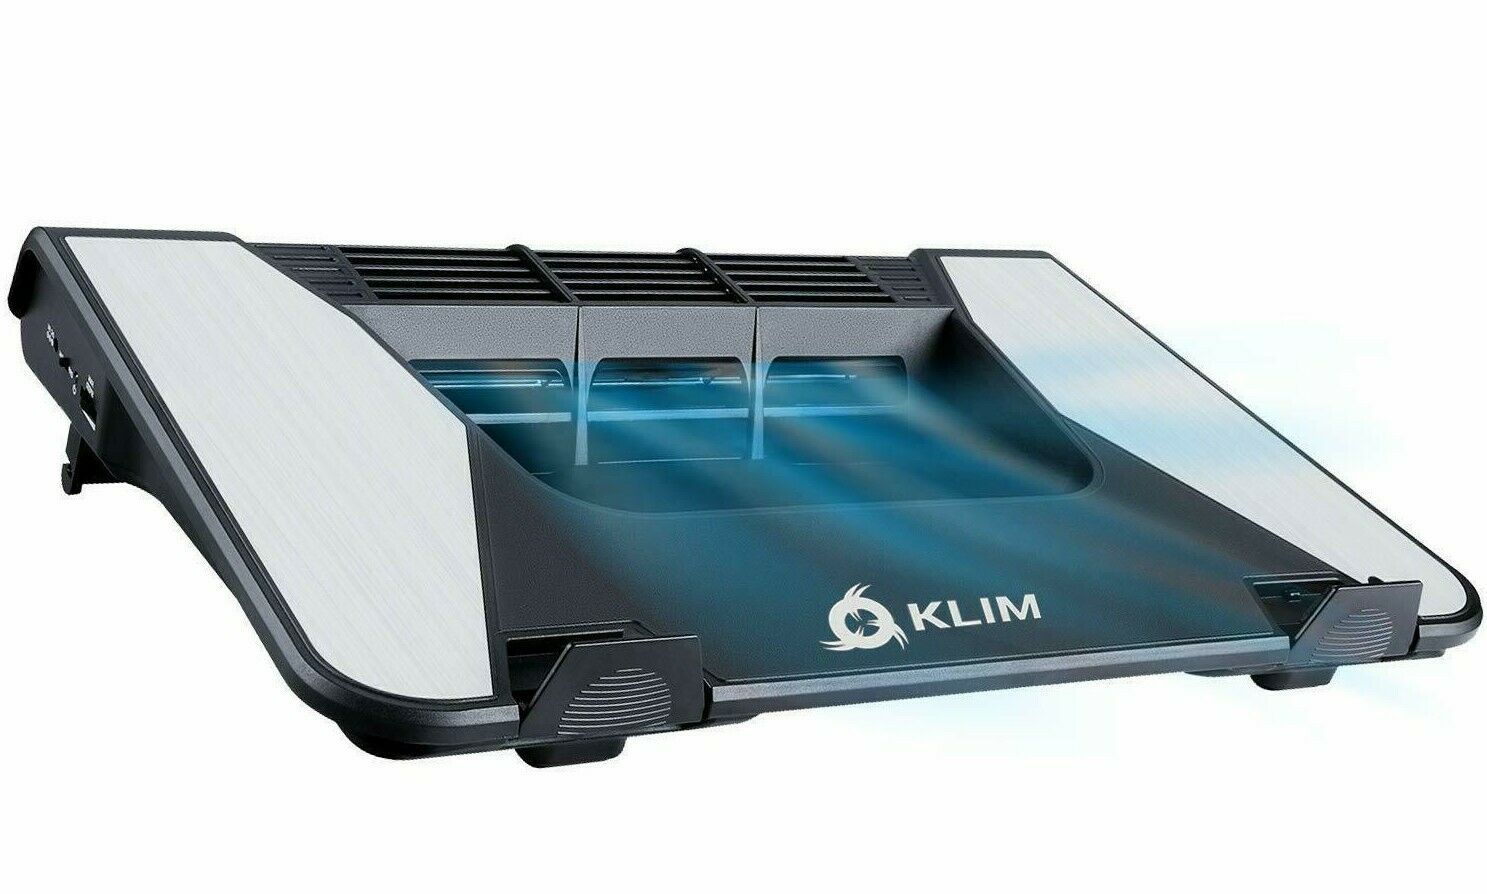 KLIM Airflow + Laptop Cooler and Stand w/Turbine Fans fits Notebooks 10 a 17 plg